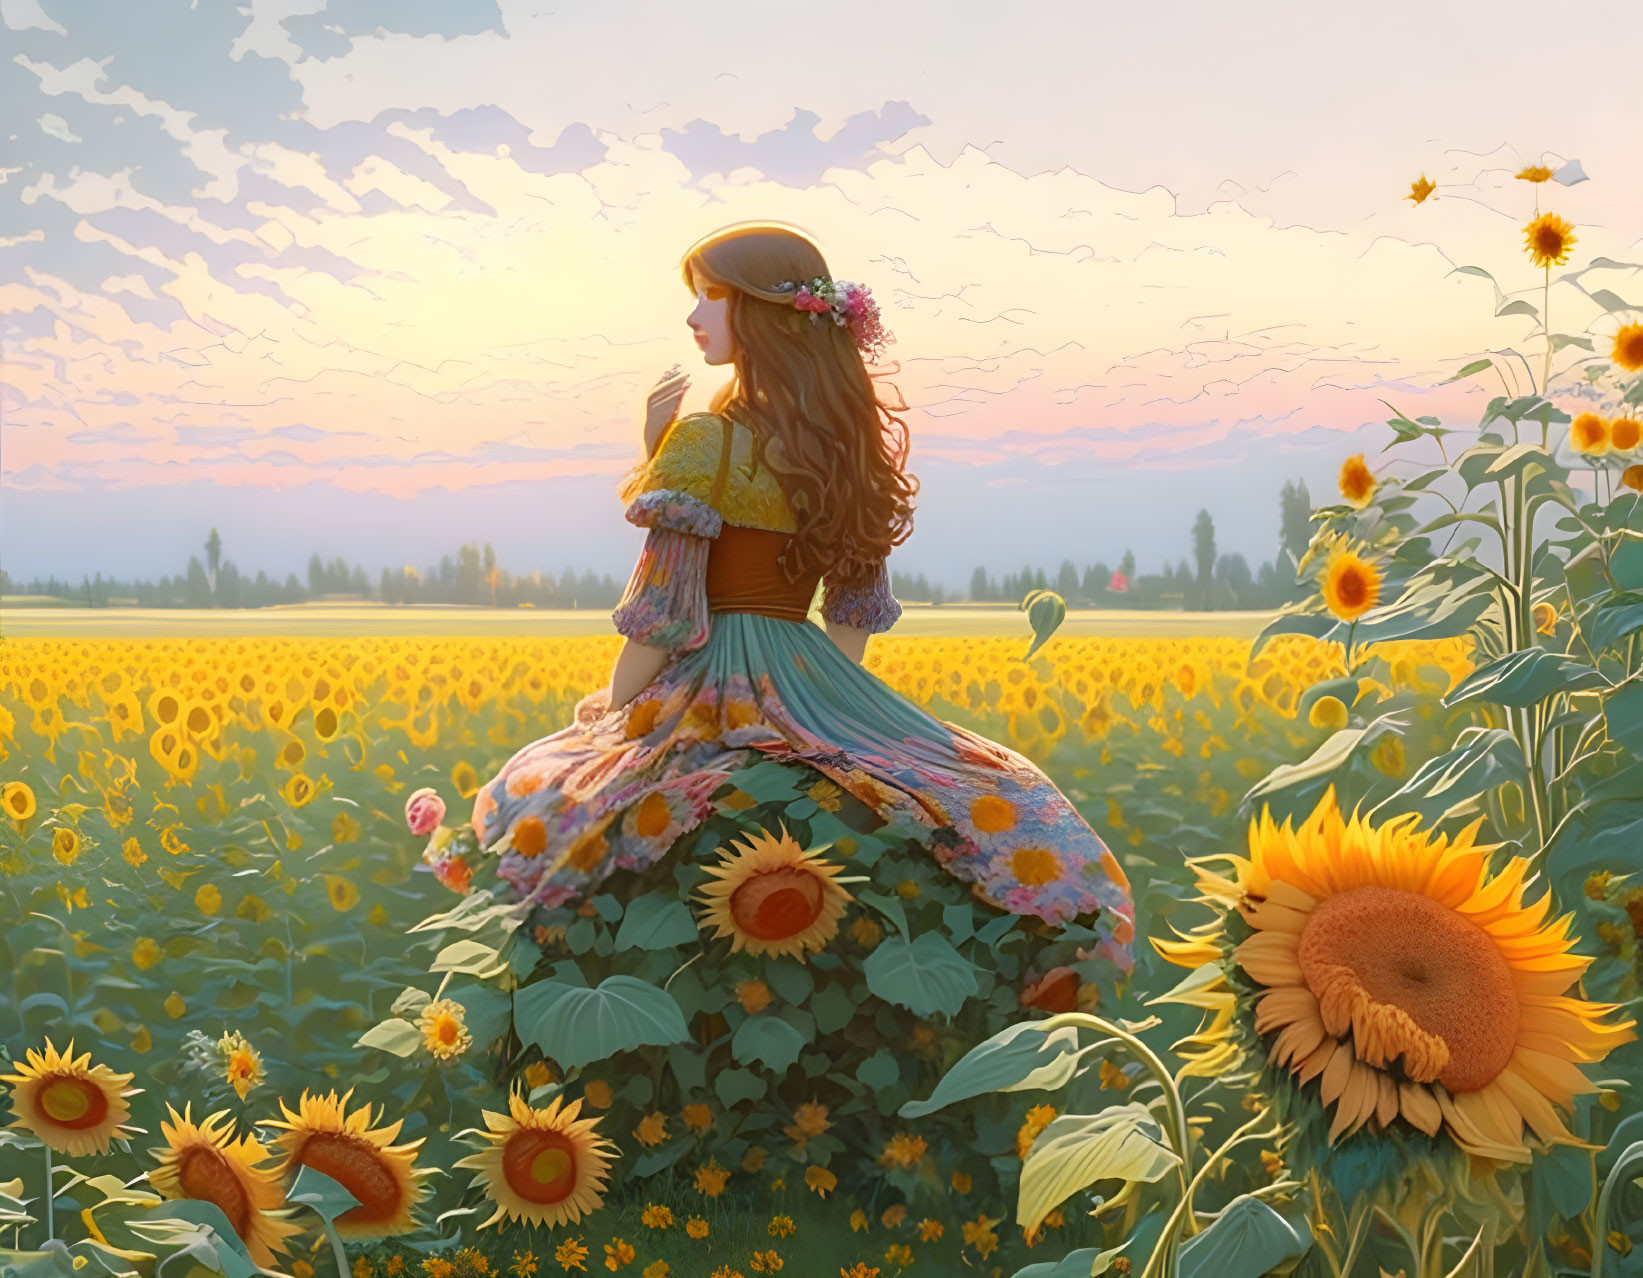 Woman in floral dress surrounded by sunflowers at sunset with flower crown